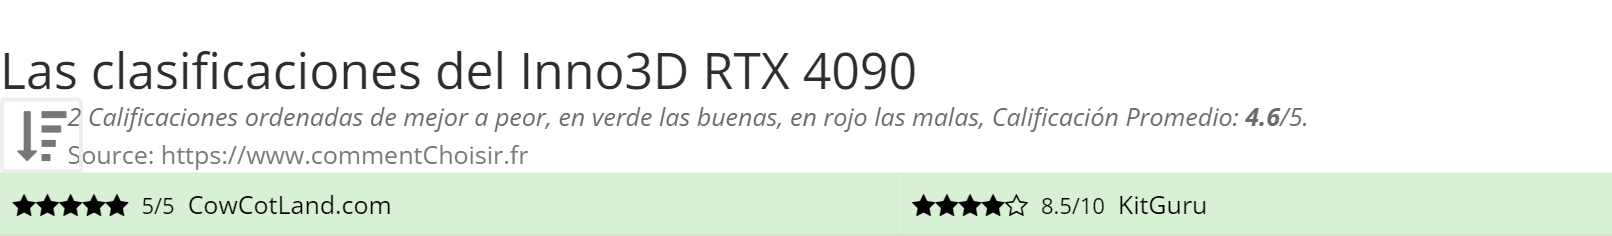 Ratings Inno3D RTX 4090